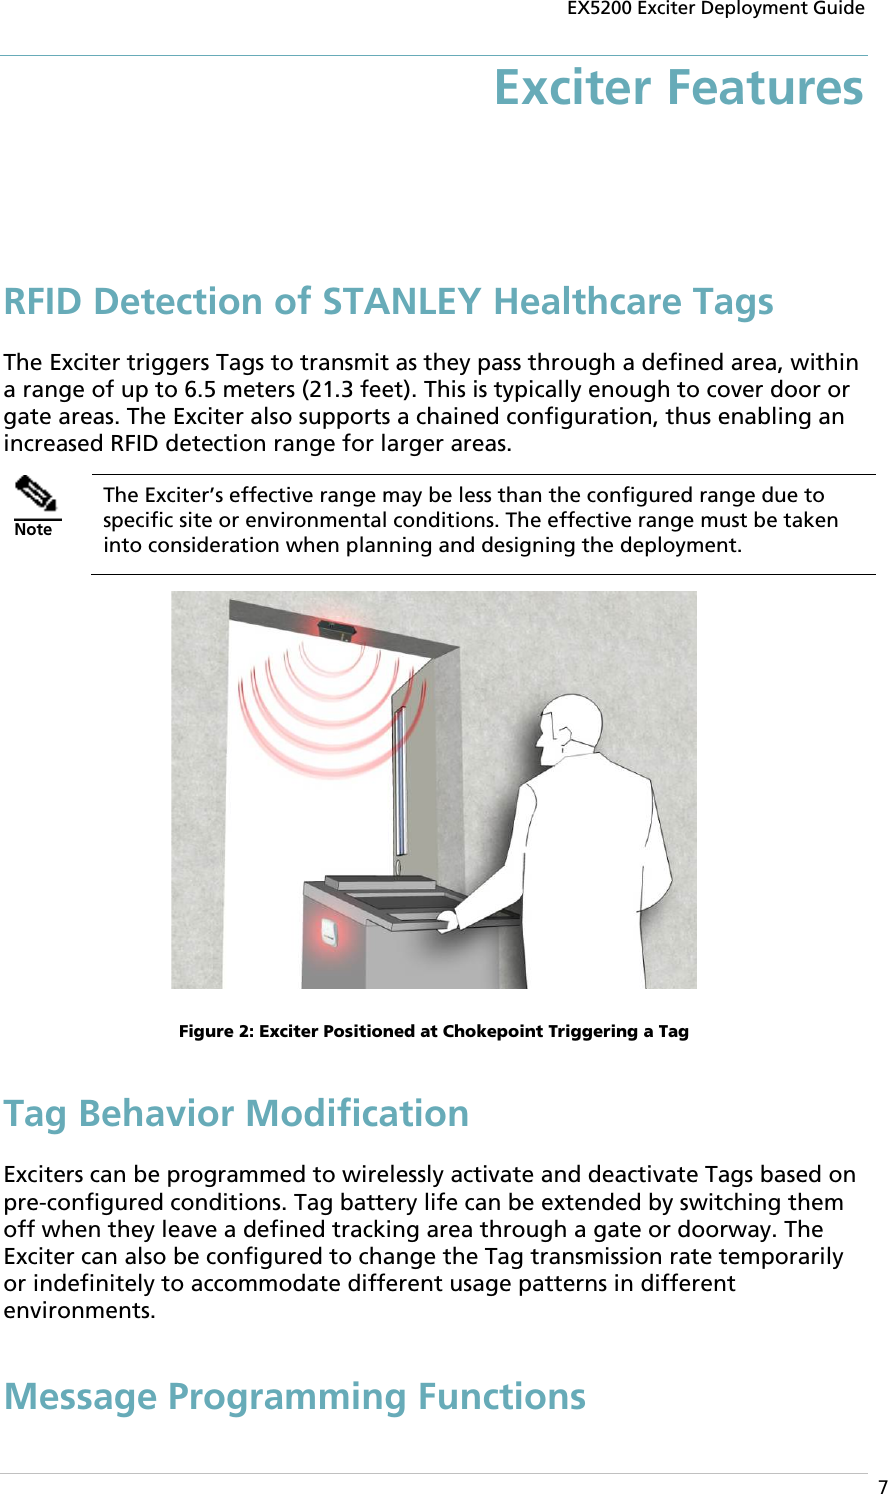 EX5200 Exciter Deployment Guide  7 Exciter Features RFID Detection of STANLEY Healthcare Tags The Exciter triggers Tags to transmit as they pass through a defined area, within a range of up to 6.5 meters (21.3 feet). This is typically enough to cover door or gate areas. The Exciter also supports a chained configuration, thus enabling an increased RFID detection range for larger areas.  Note The Exciter’s effective range may be less than the configured range due to specific site or environmental conditions. The effective range must be taken into consideration when planning and designing the deployment.  Figure 2: Exciter Positioned at Chokepoint Triggering a Tag Tag Behavior Modification Exciters can be programmed to wirelessly activate and deactivate Tags based on pre-configured conditions. Tag battery life can be extended by switching them off when they leave a defined tracking area through a gate or doorway. The Exciter can also be configured to change the Tag transmission rate temporarily or indefinitely to accommodate different usage patterns in different environments. Message Programming Functions 